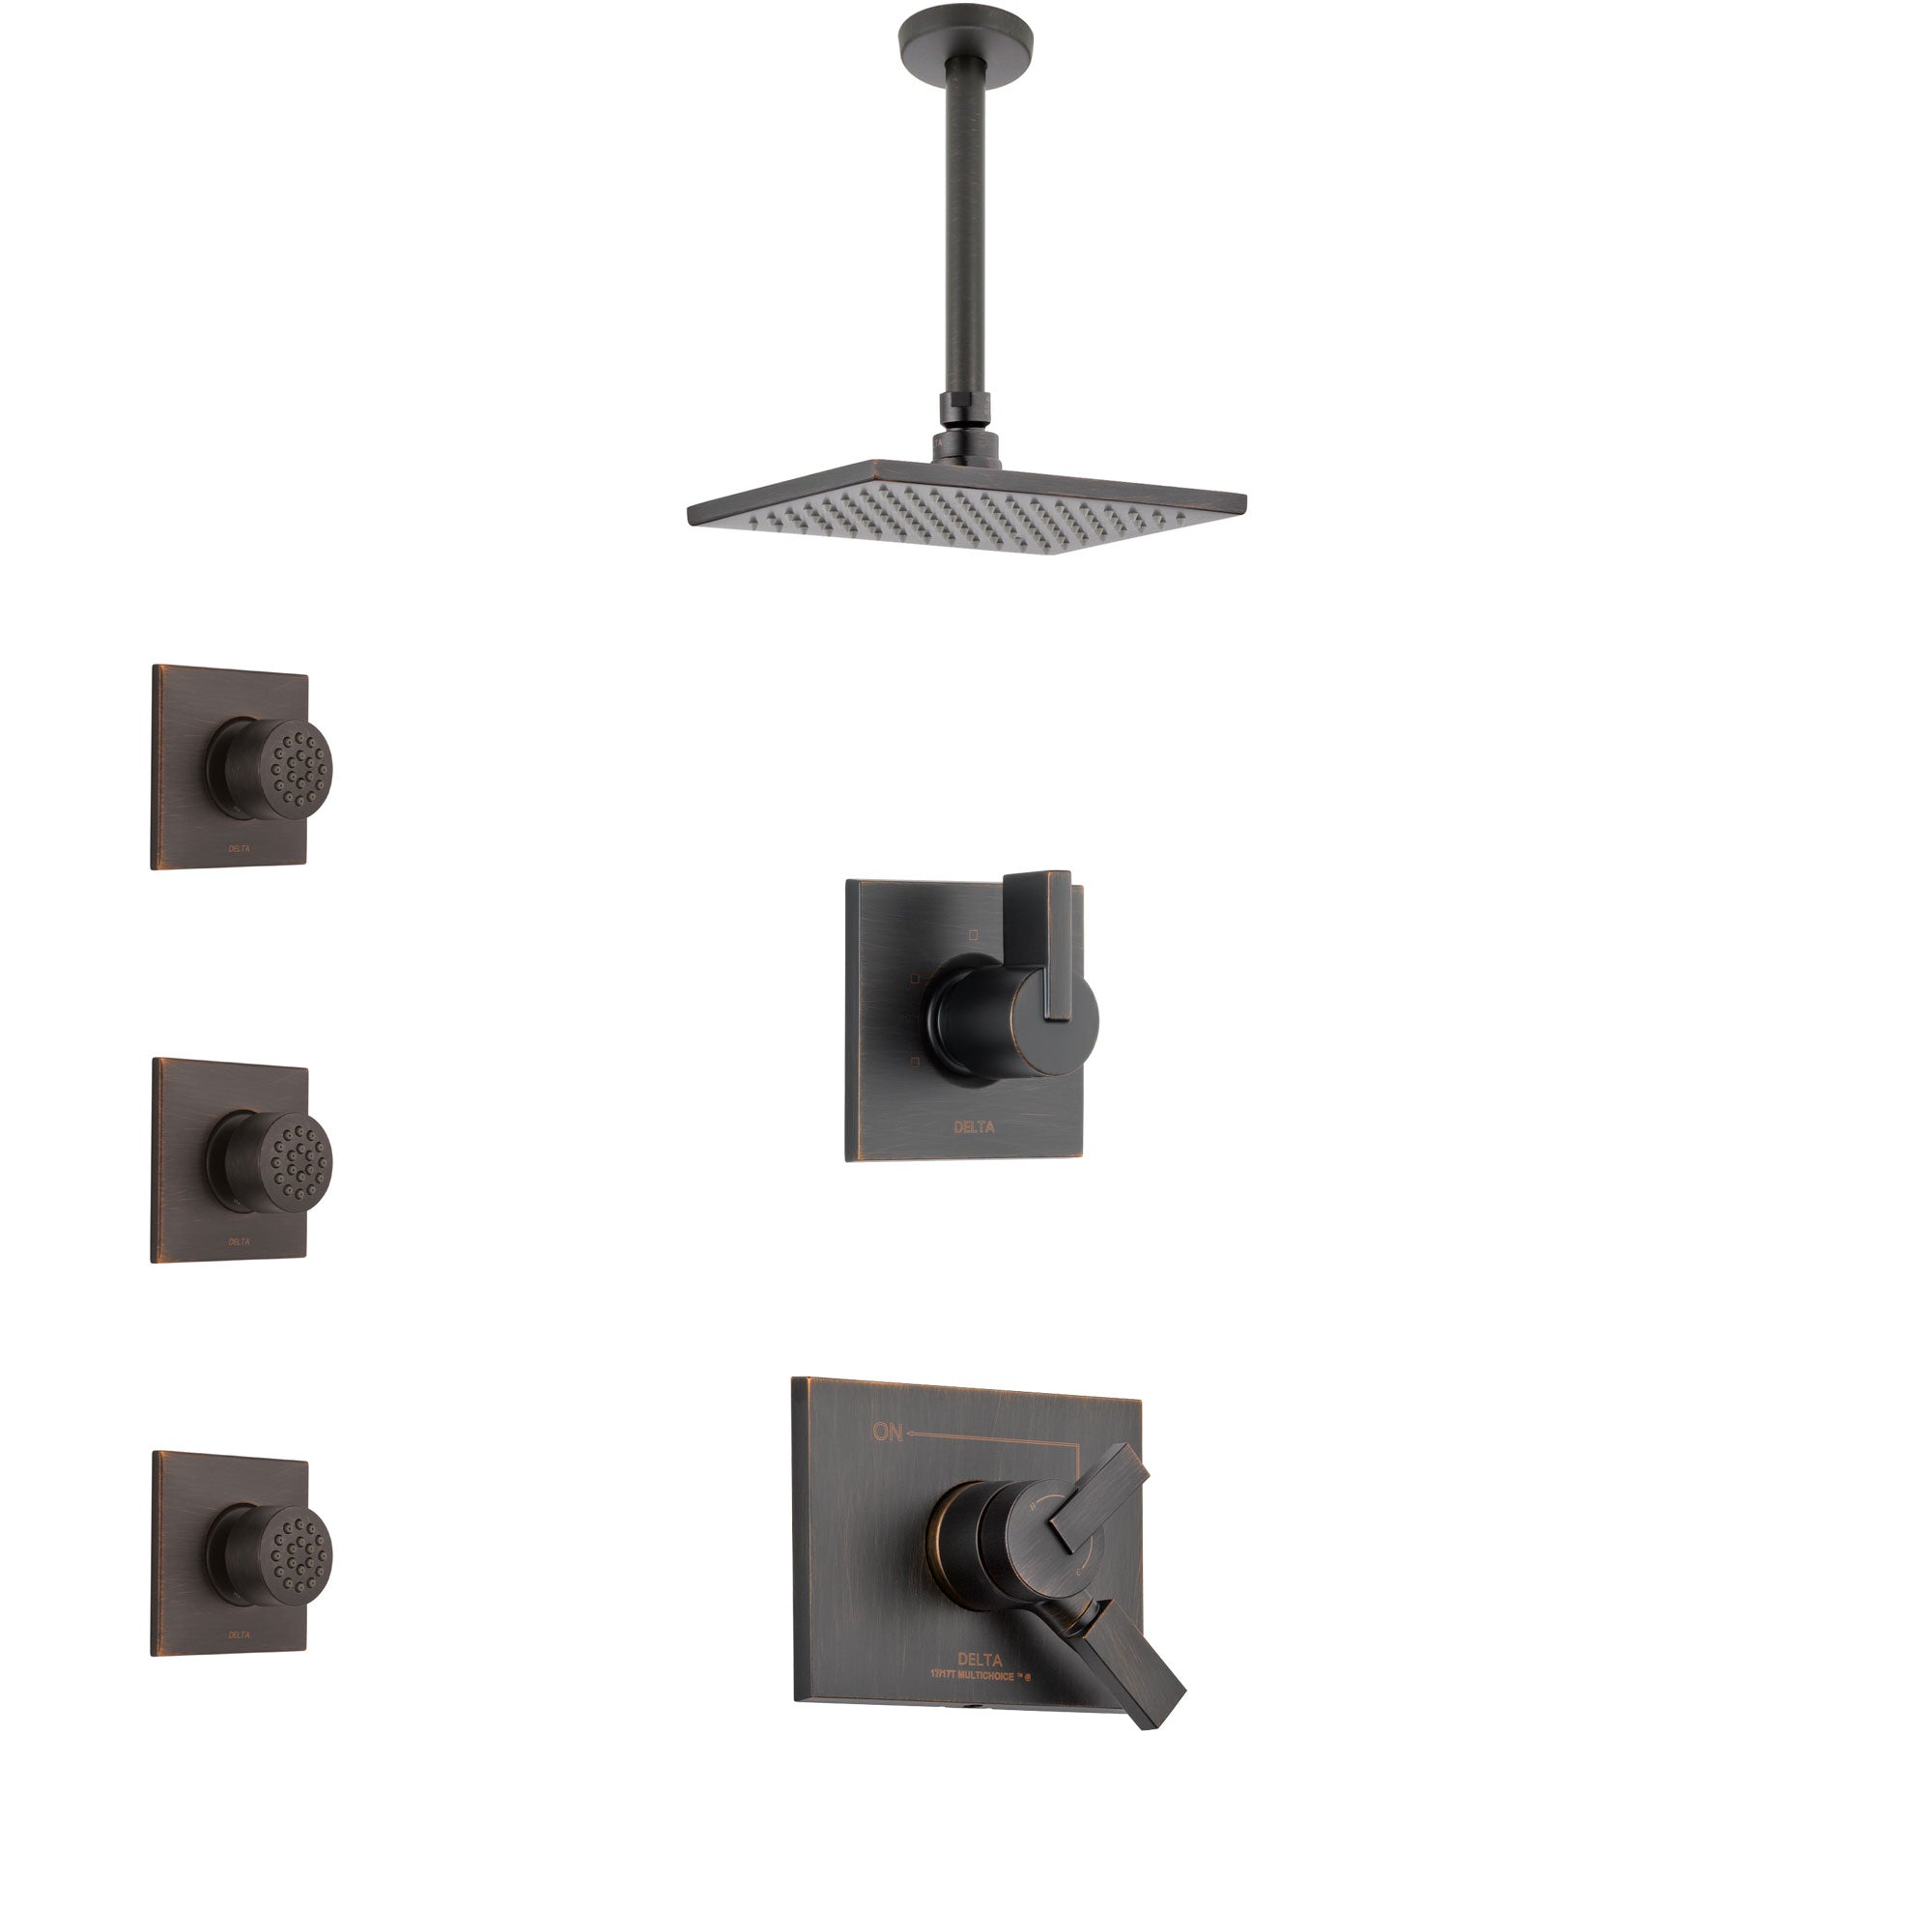 Delta Vero Venetian Bronze Finish Shower System with Dual Control Handle, 3-Setting Diverter, Ceiling Mount Showerhead, and 3 Body Sprays SS1753RB4